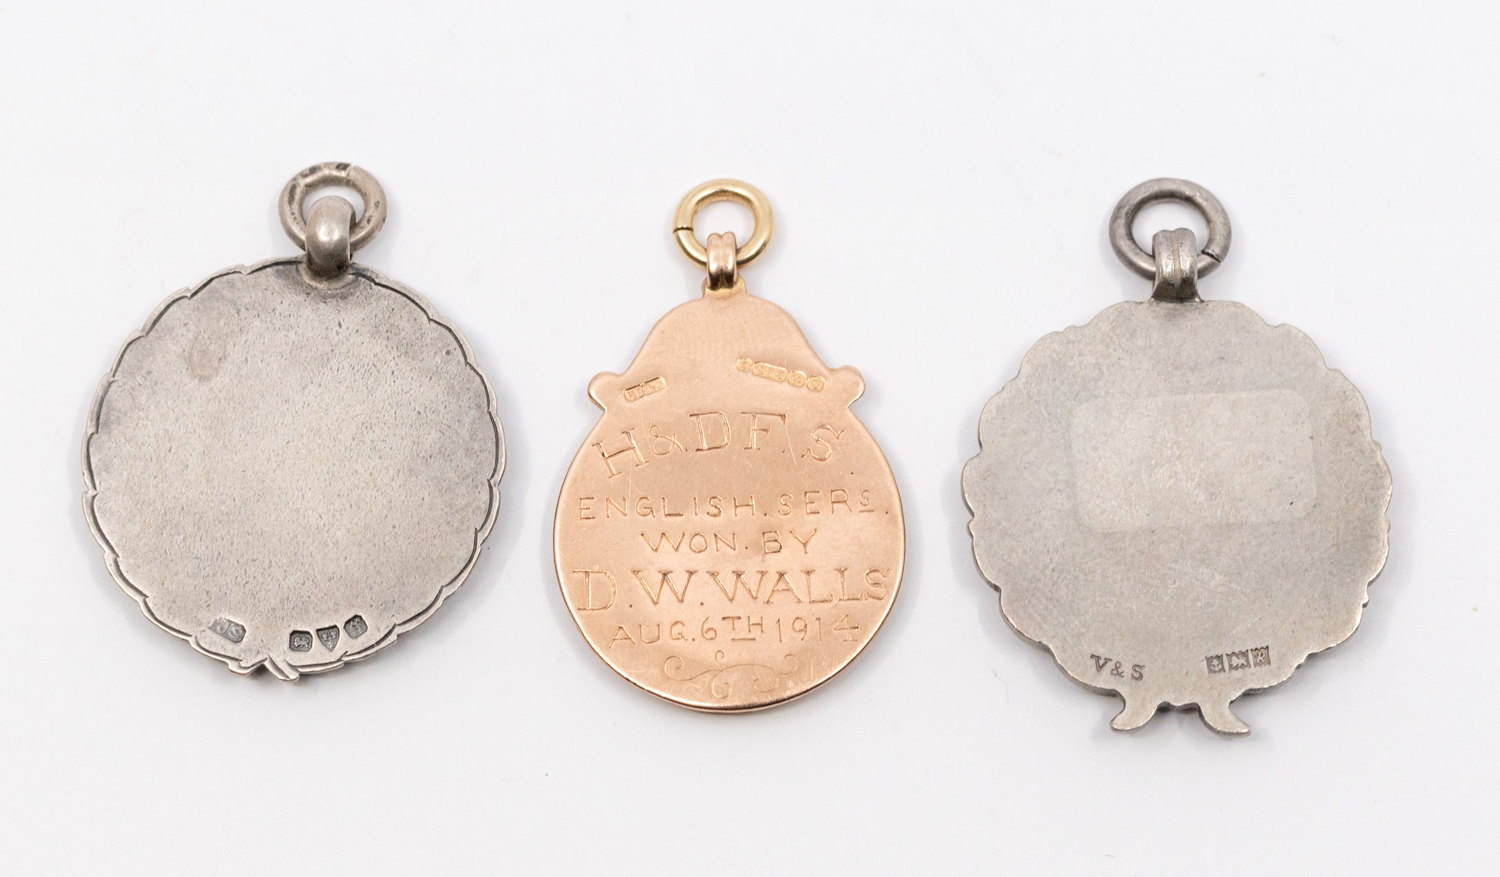 Three early to mid 20th century silver or gold and enamel fob medals, all with enamelled rabbit - Image 2 of 2